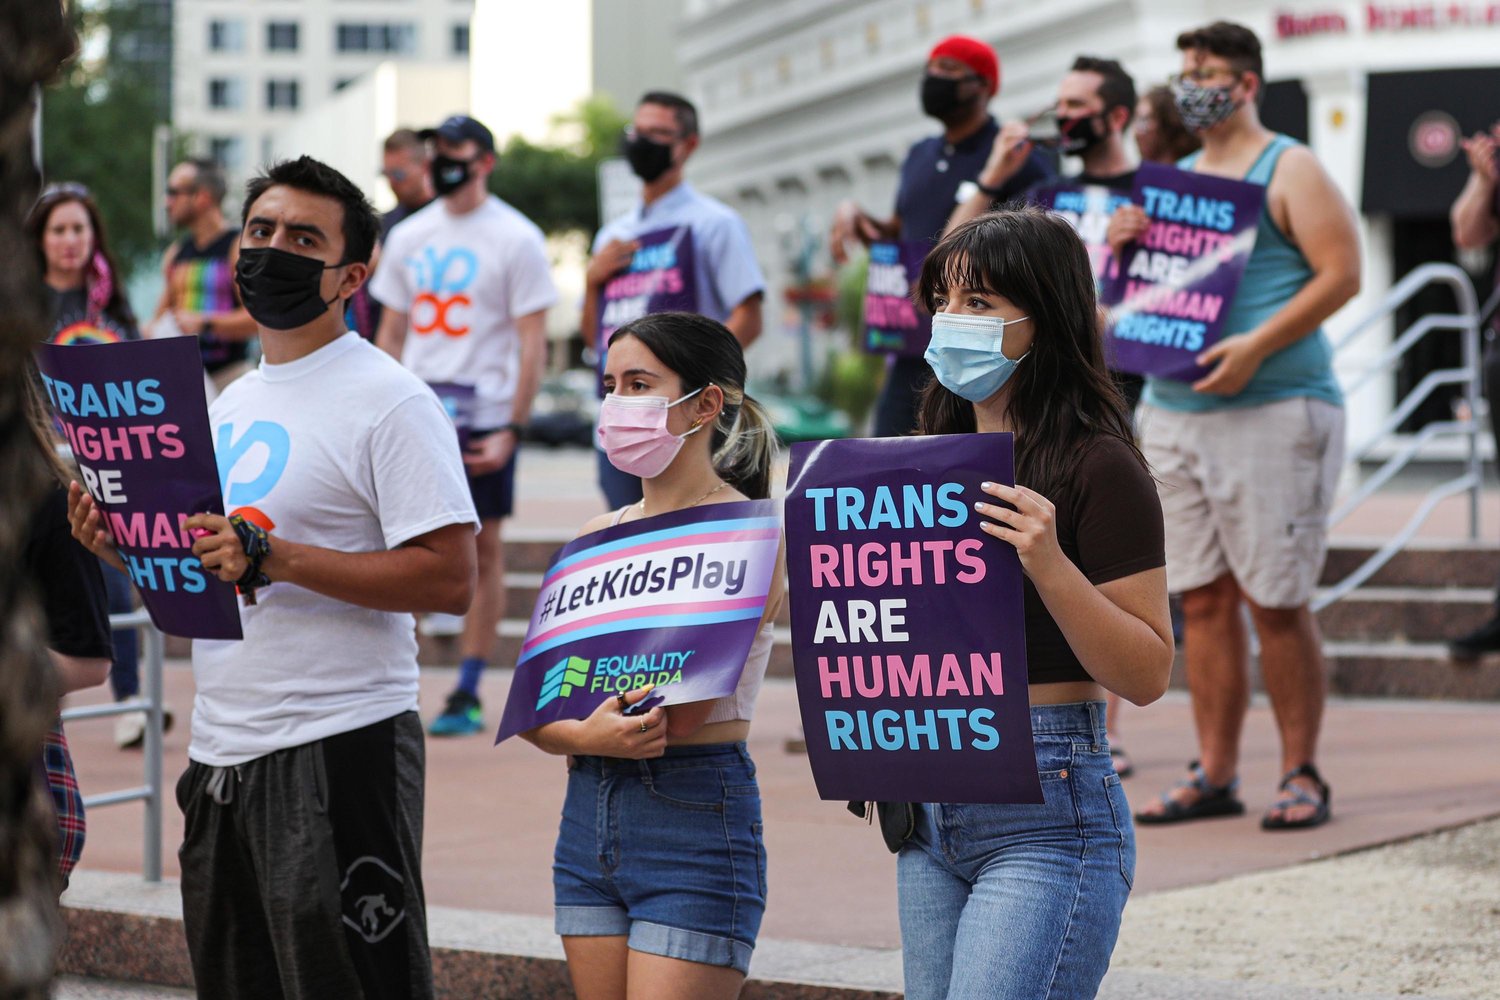 A group of attendees listen to a speaker during the #ProtectTransKids rally outside Orlando City Hall on June 1, 2021, in Orlando, Florida.